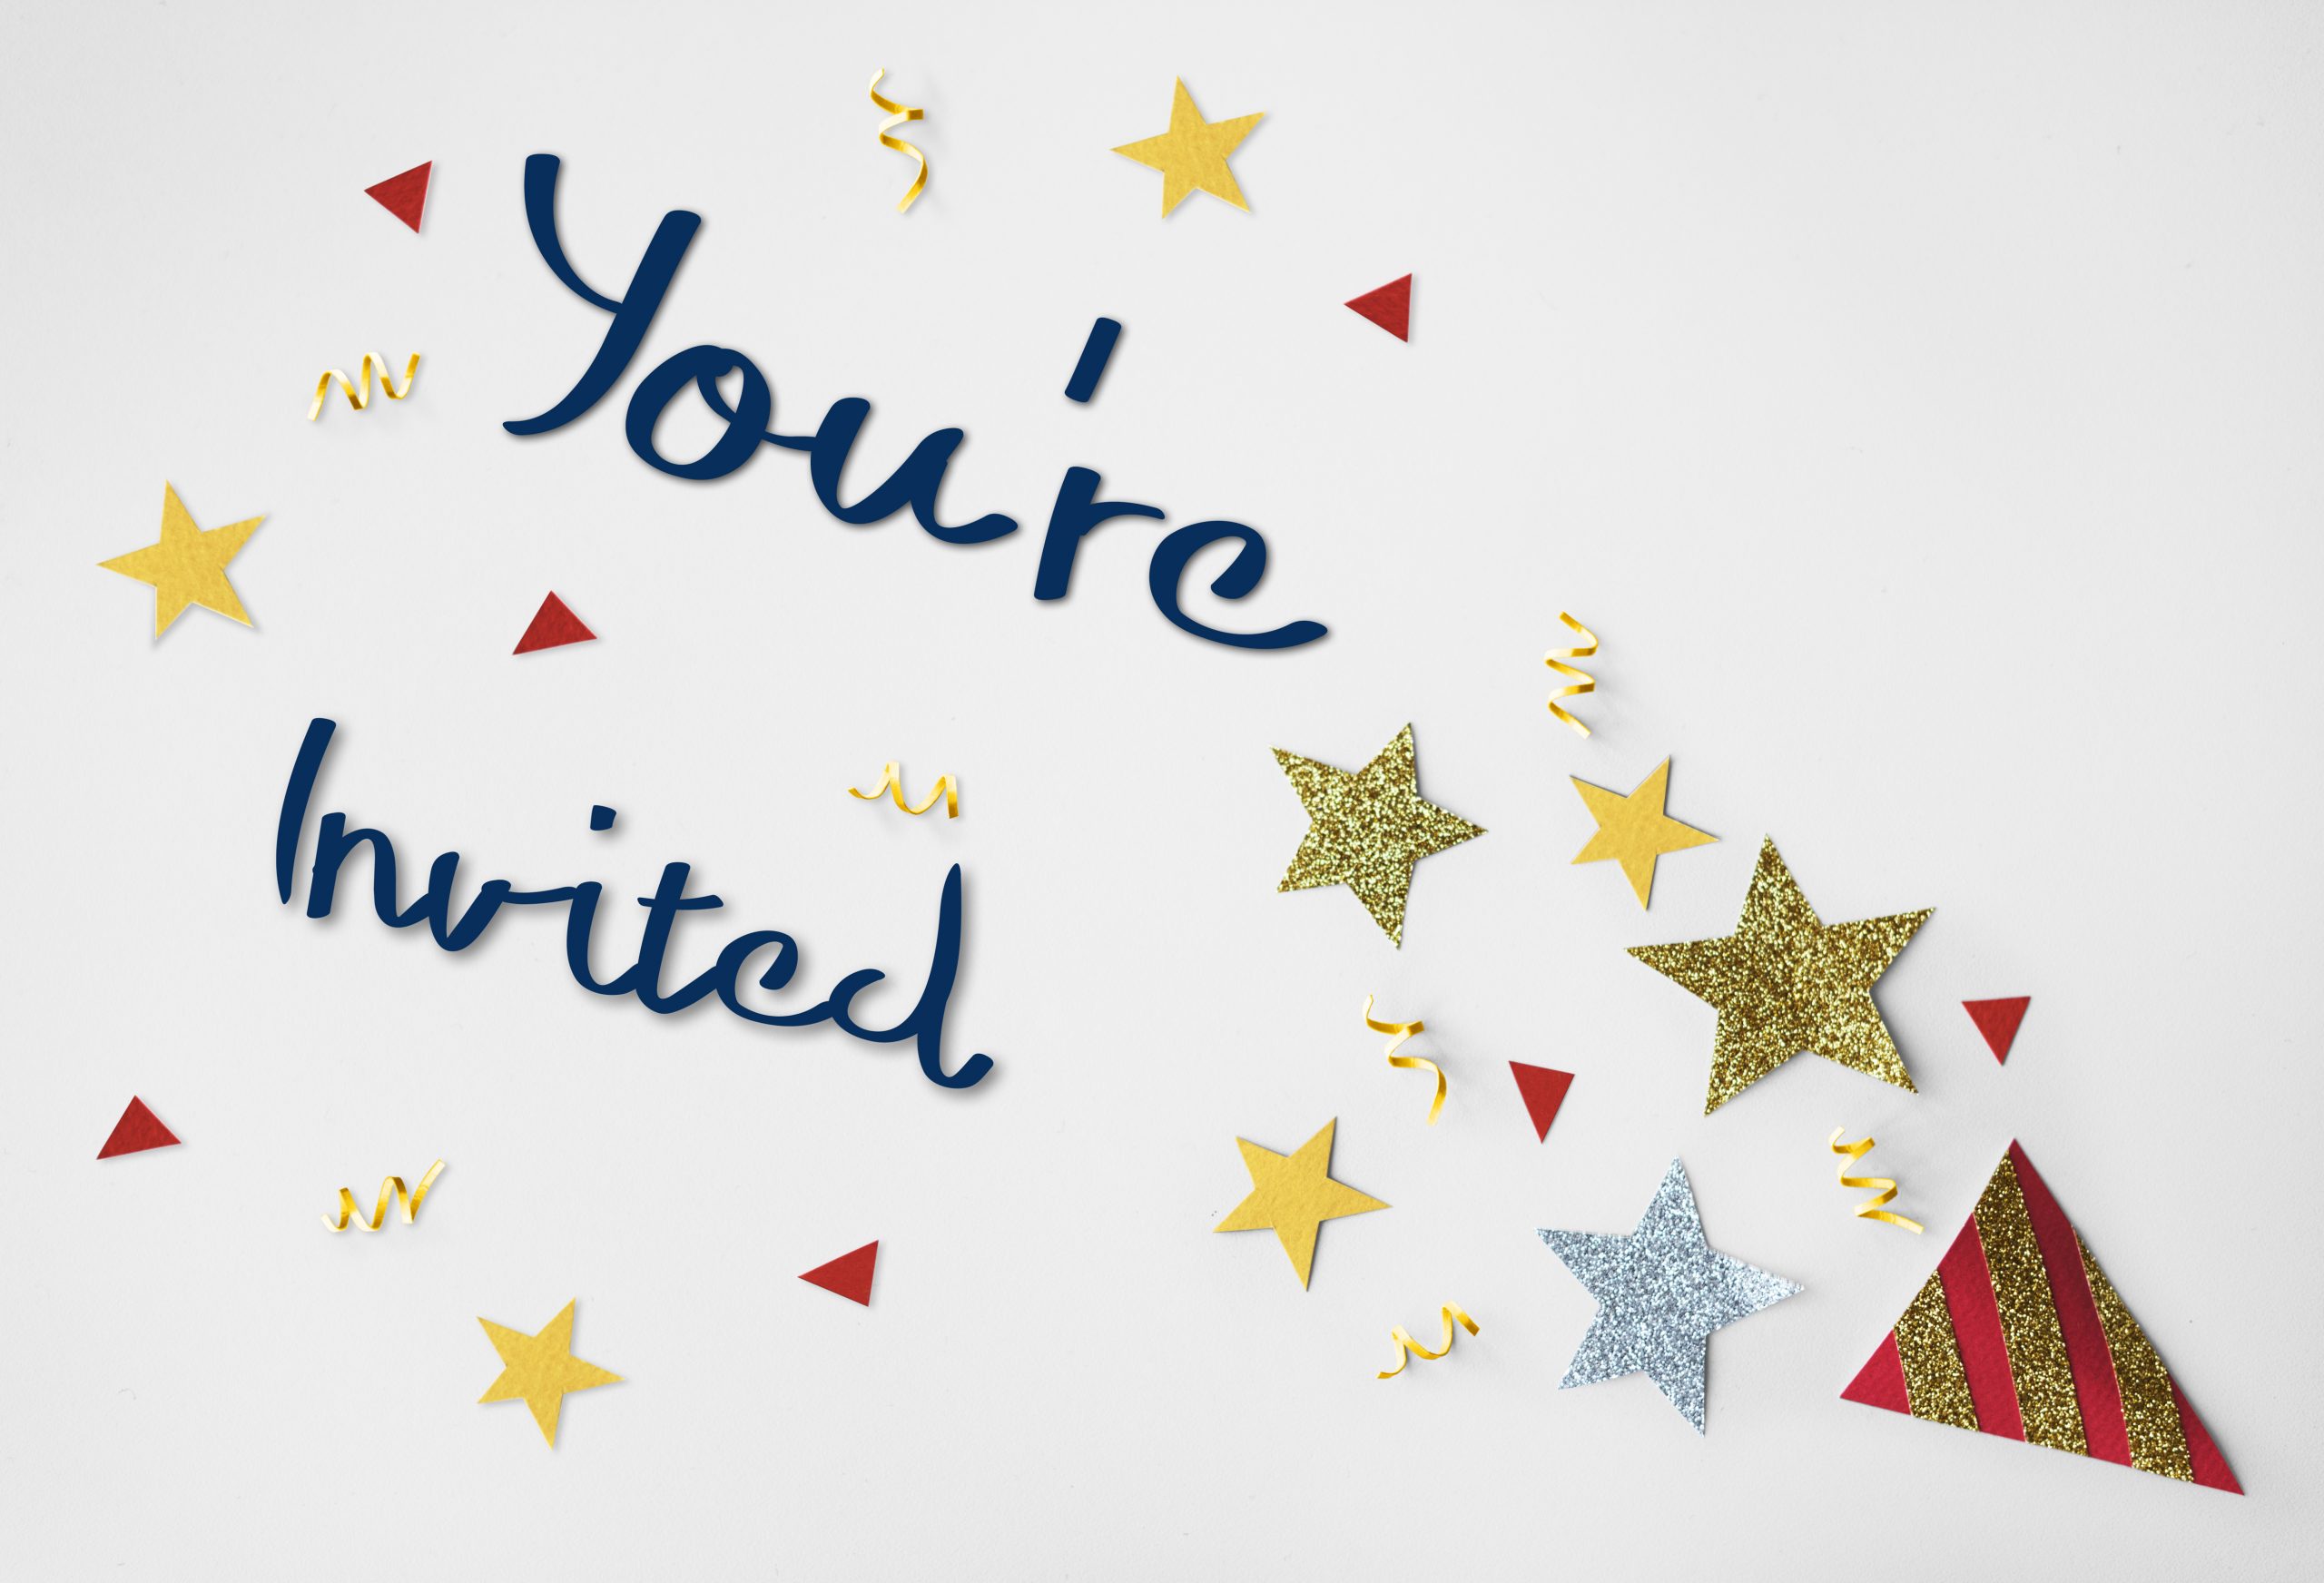 Image text reads "You're Invited" with stars and confetti around it